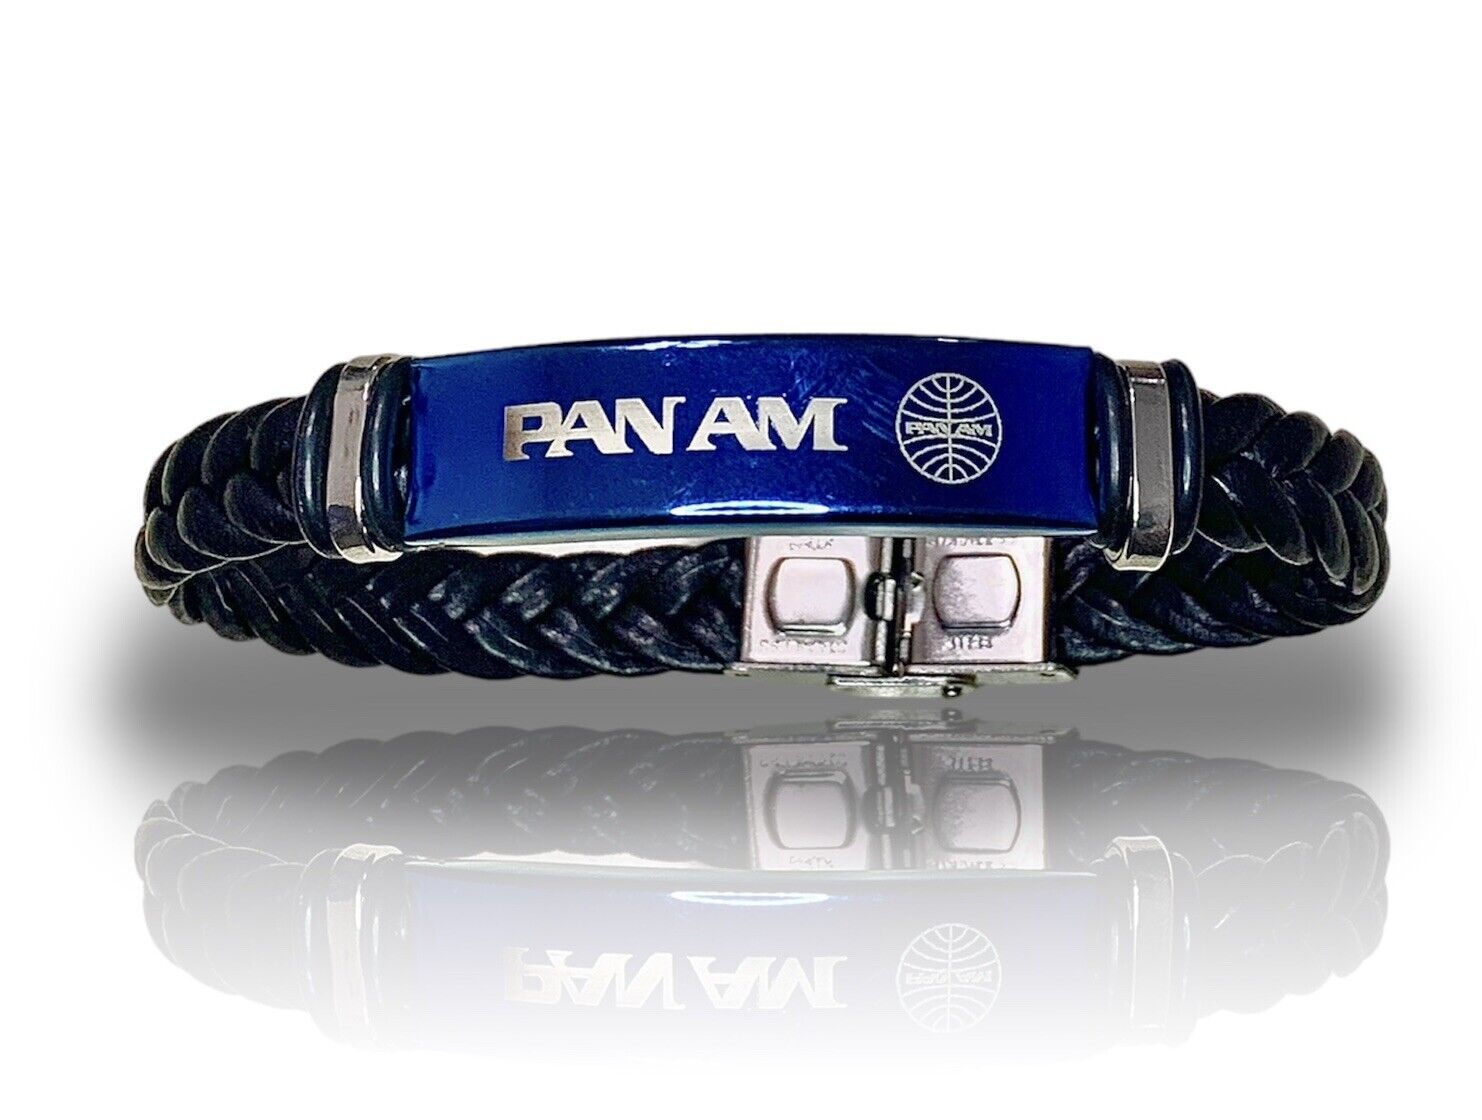 SALE Beautiful￼ Pan Am Bracelet￼ Logo PanAm Airlines￼ 8 Inch￼￼ stainless steel